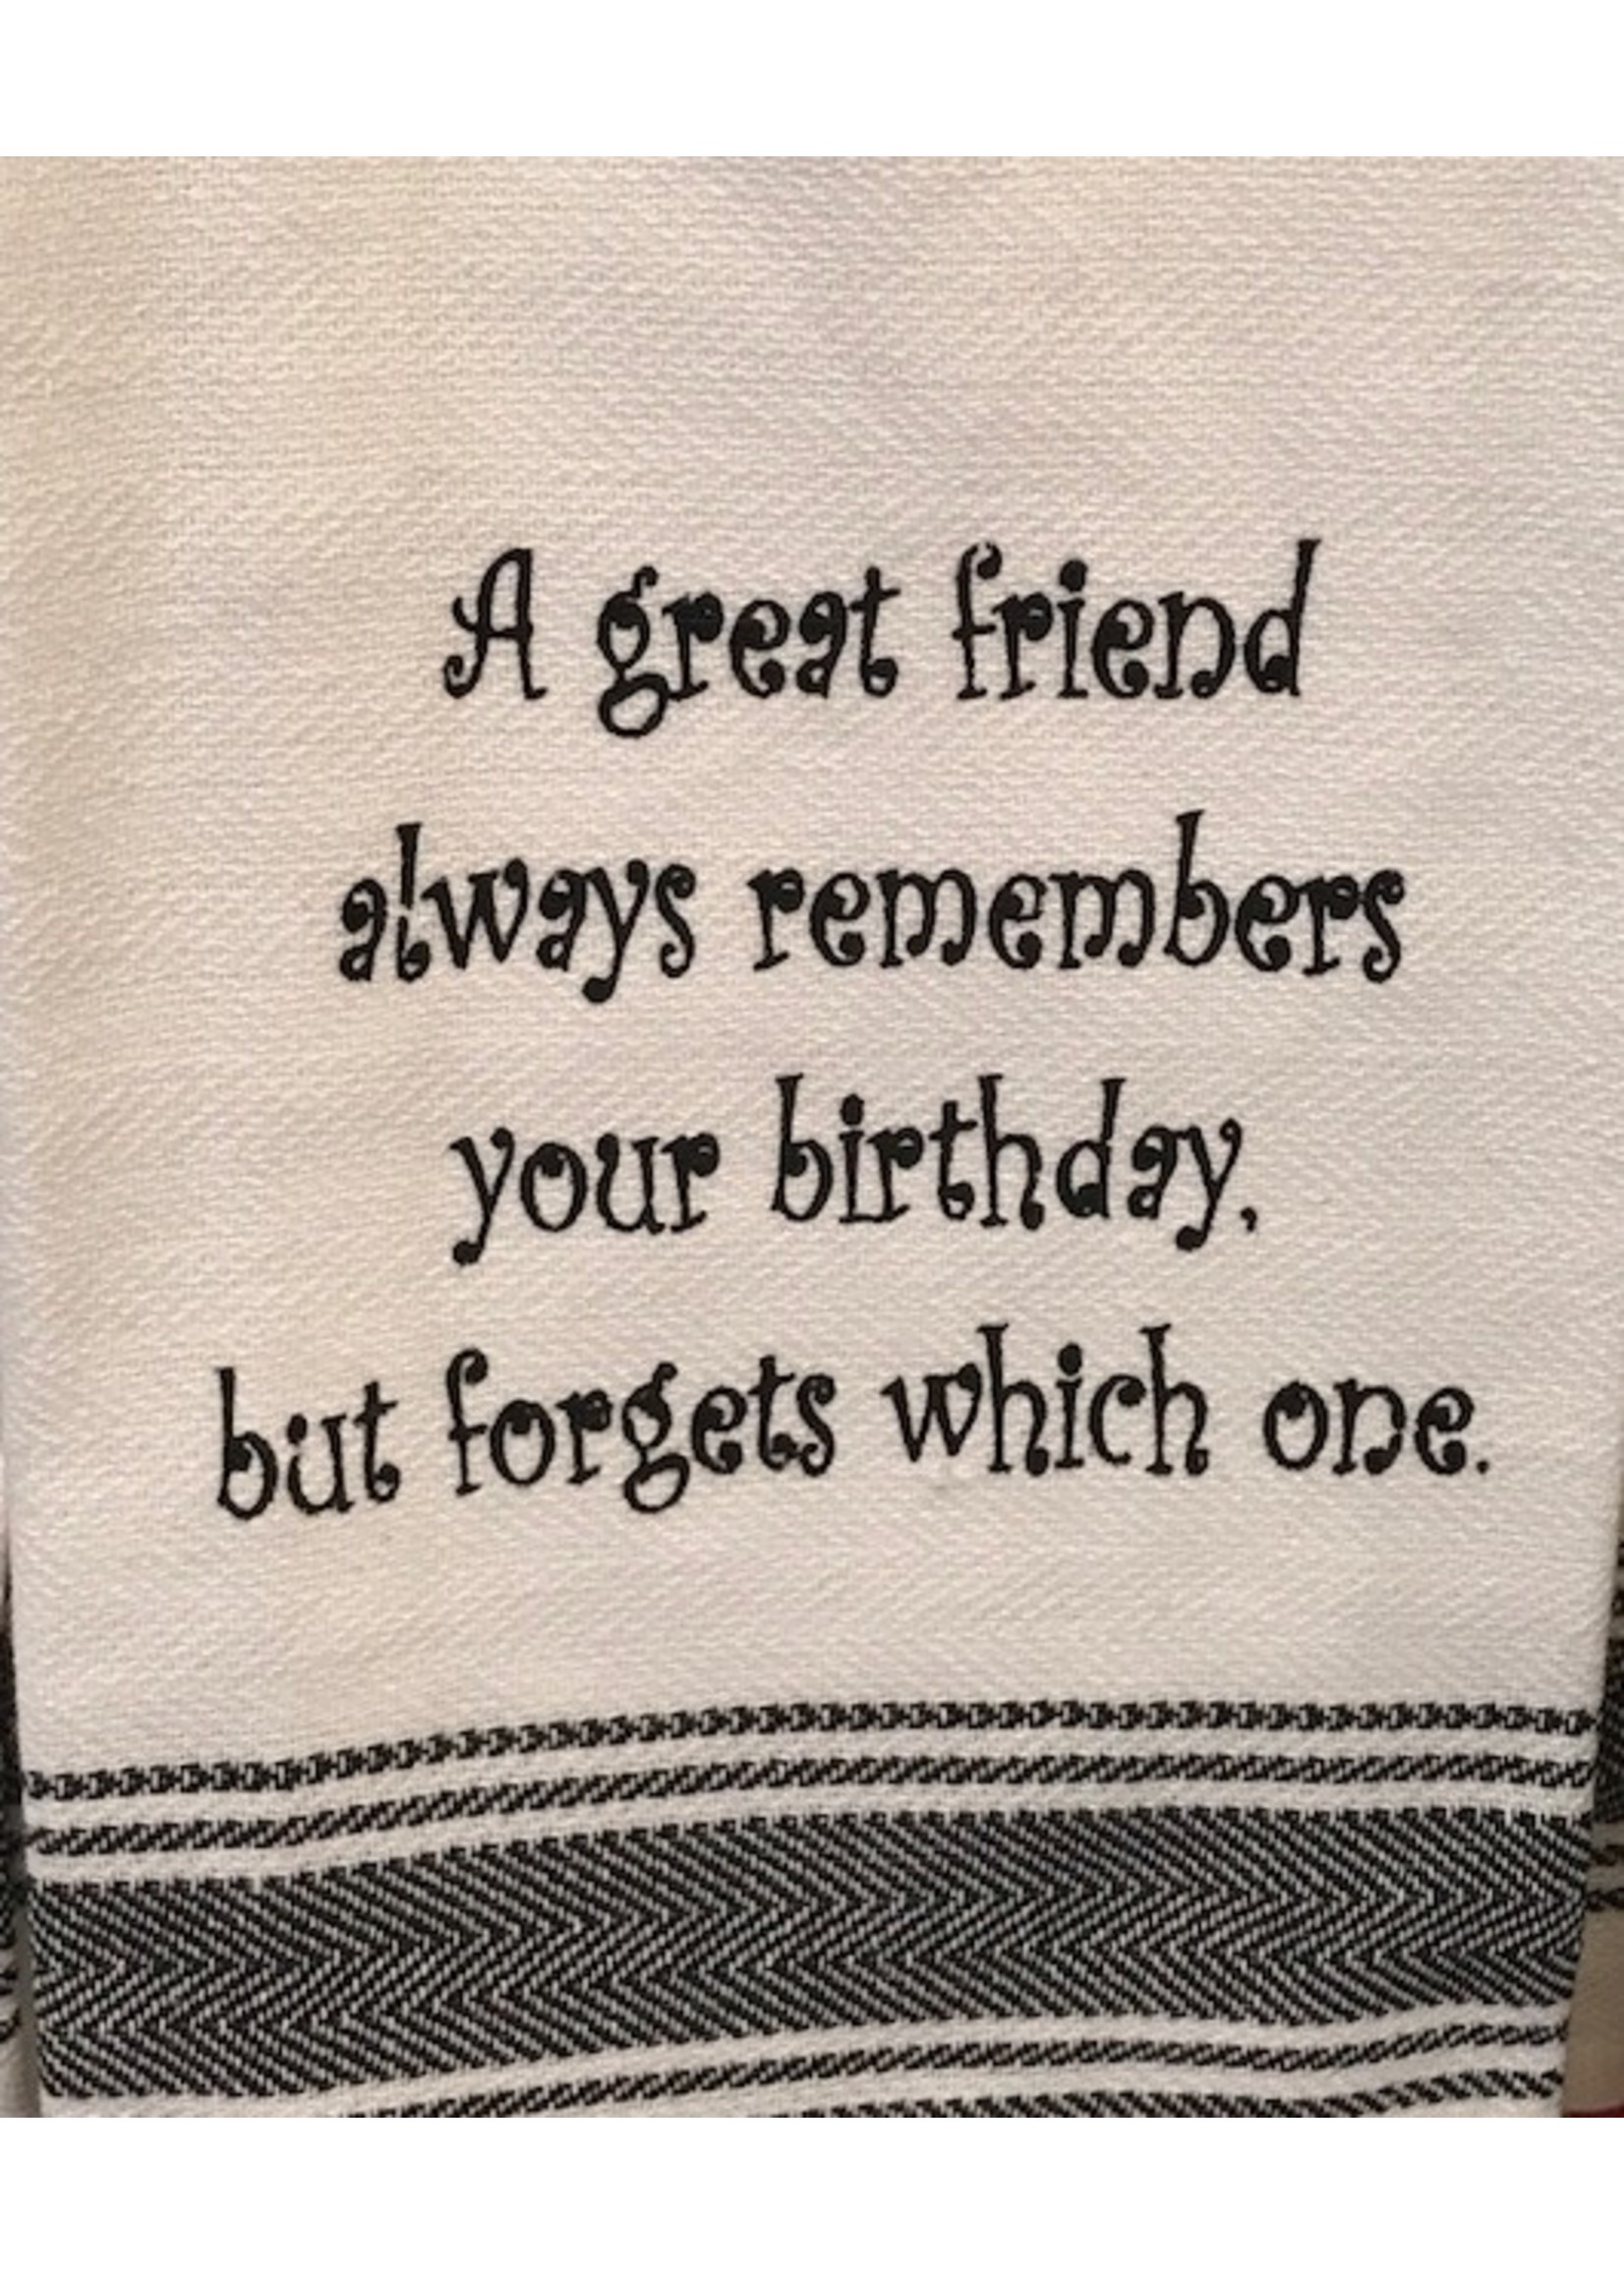 Wild Hare Designs A Great Friend Always Remembers Towel